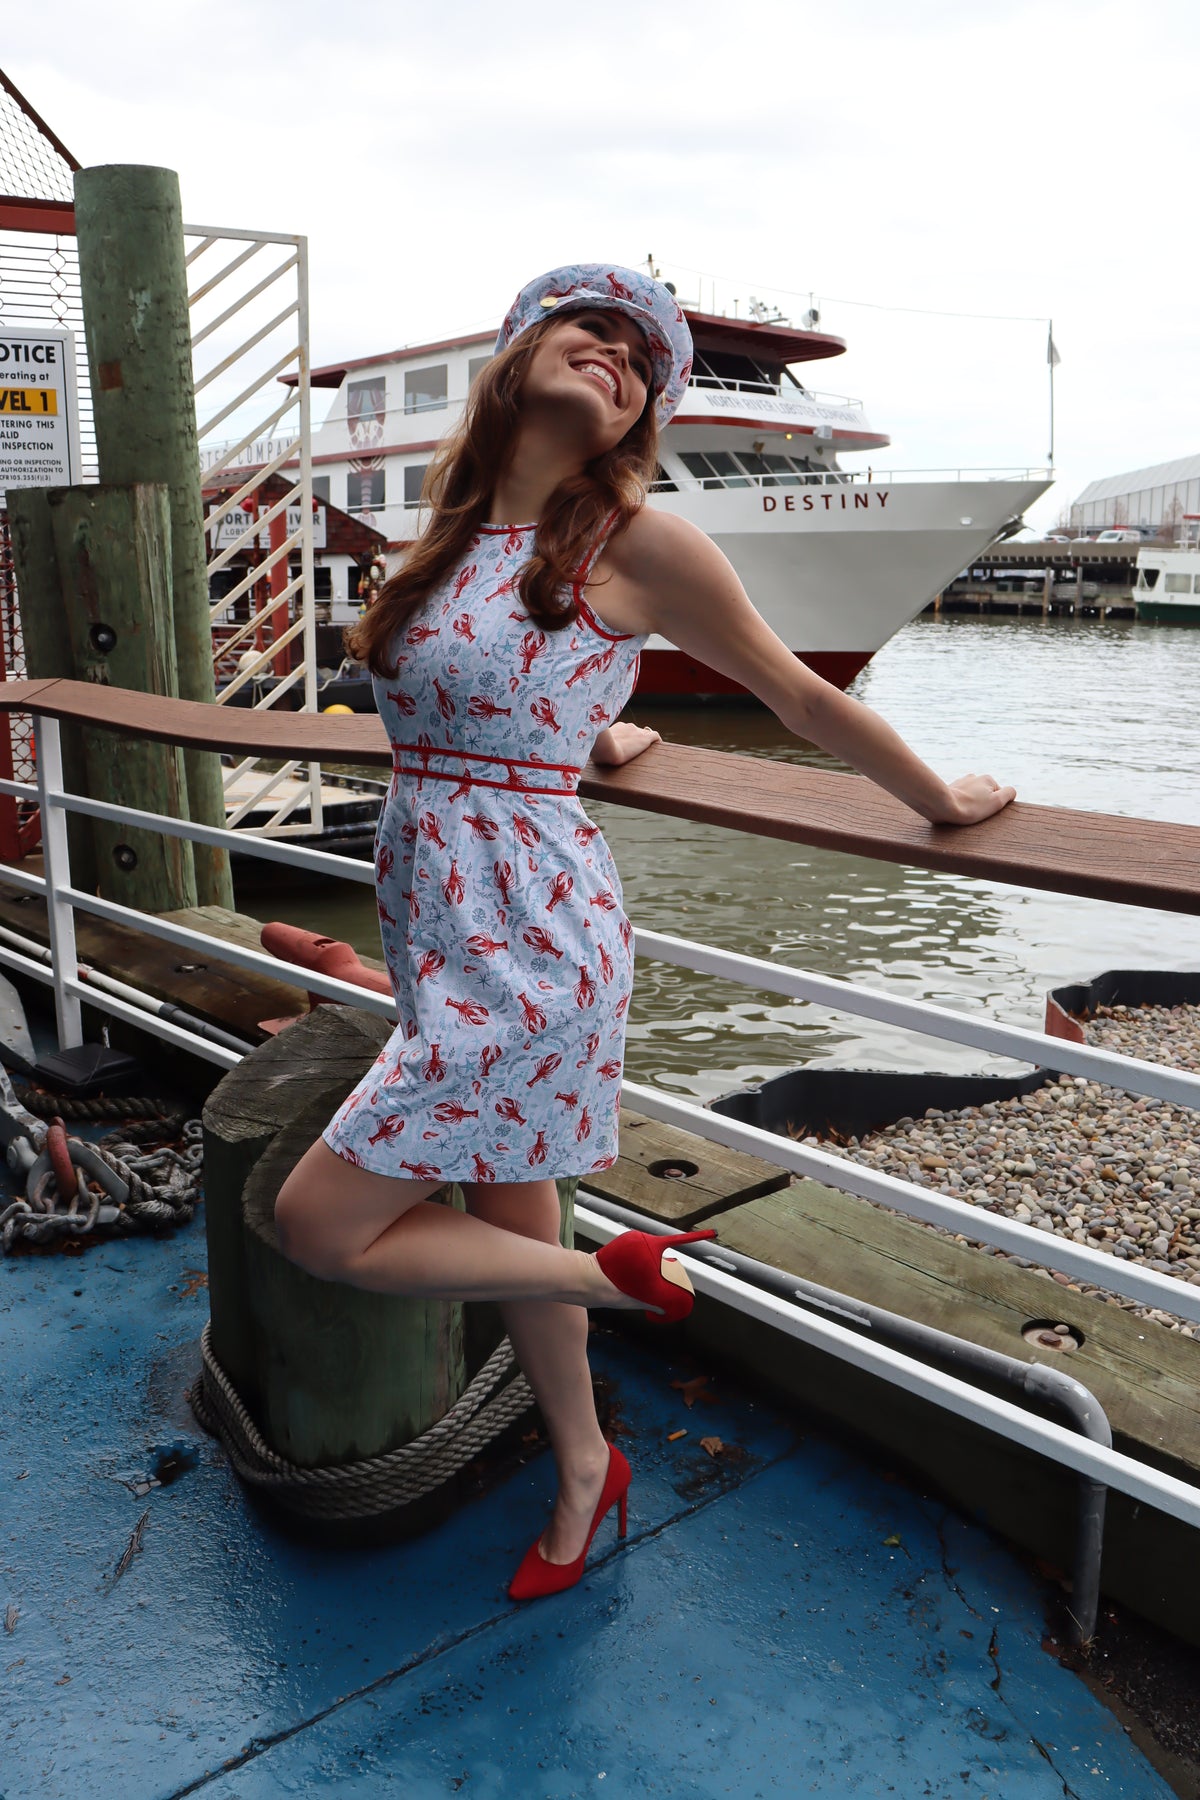 Model wearing light blue and red lobster on white background print dress with matching hat smiling reaching back towards railing in front of a red and white boat.